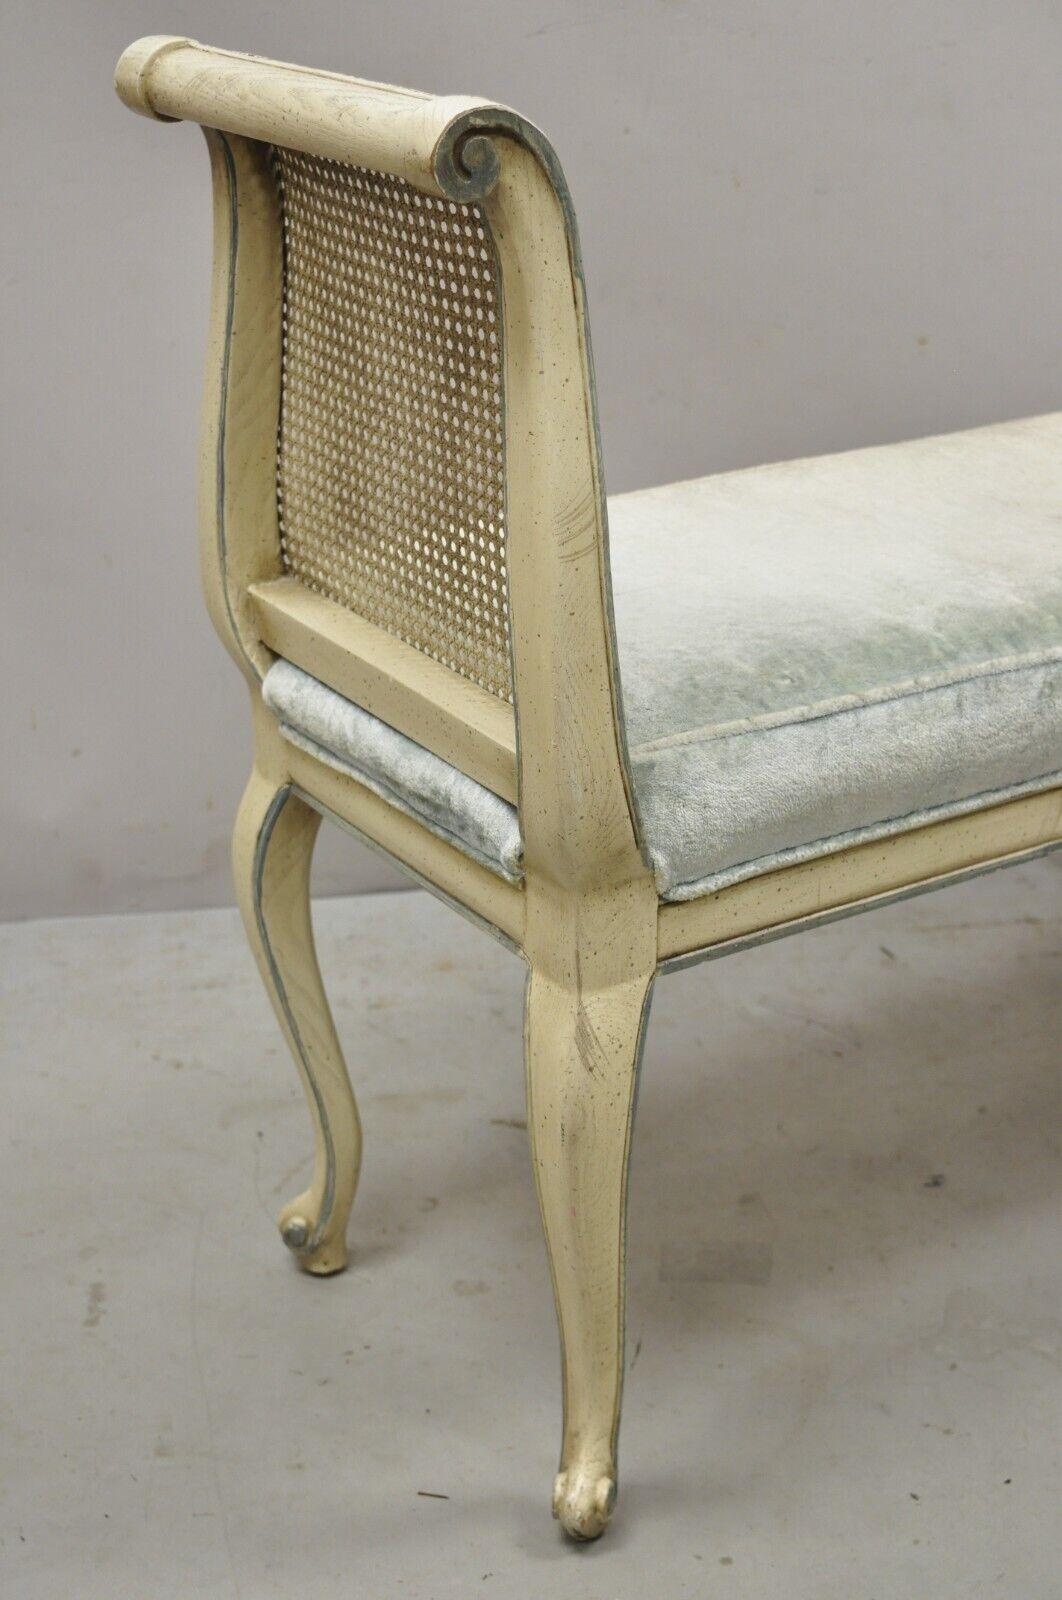 Caning Vtg French Provincial Style Cream Painted Cane Cabriole Leg Window Bench w/ Arms